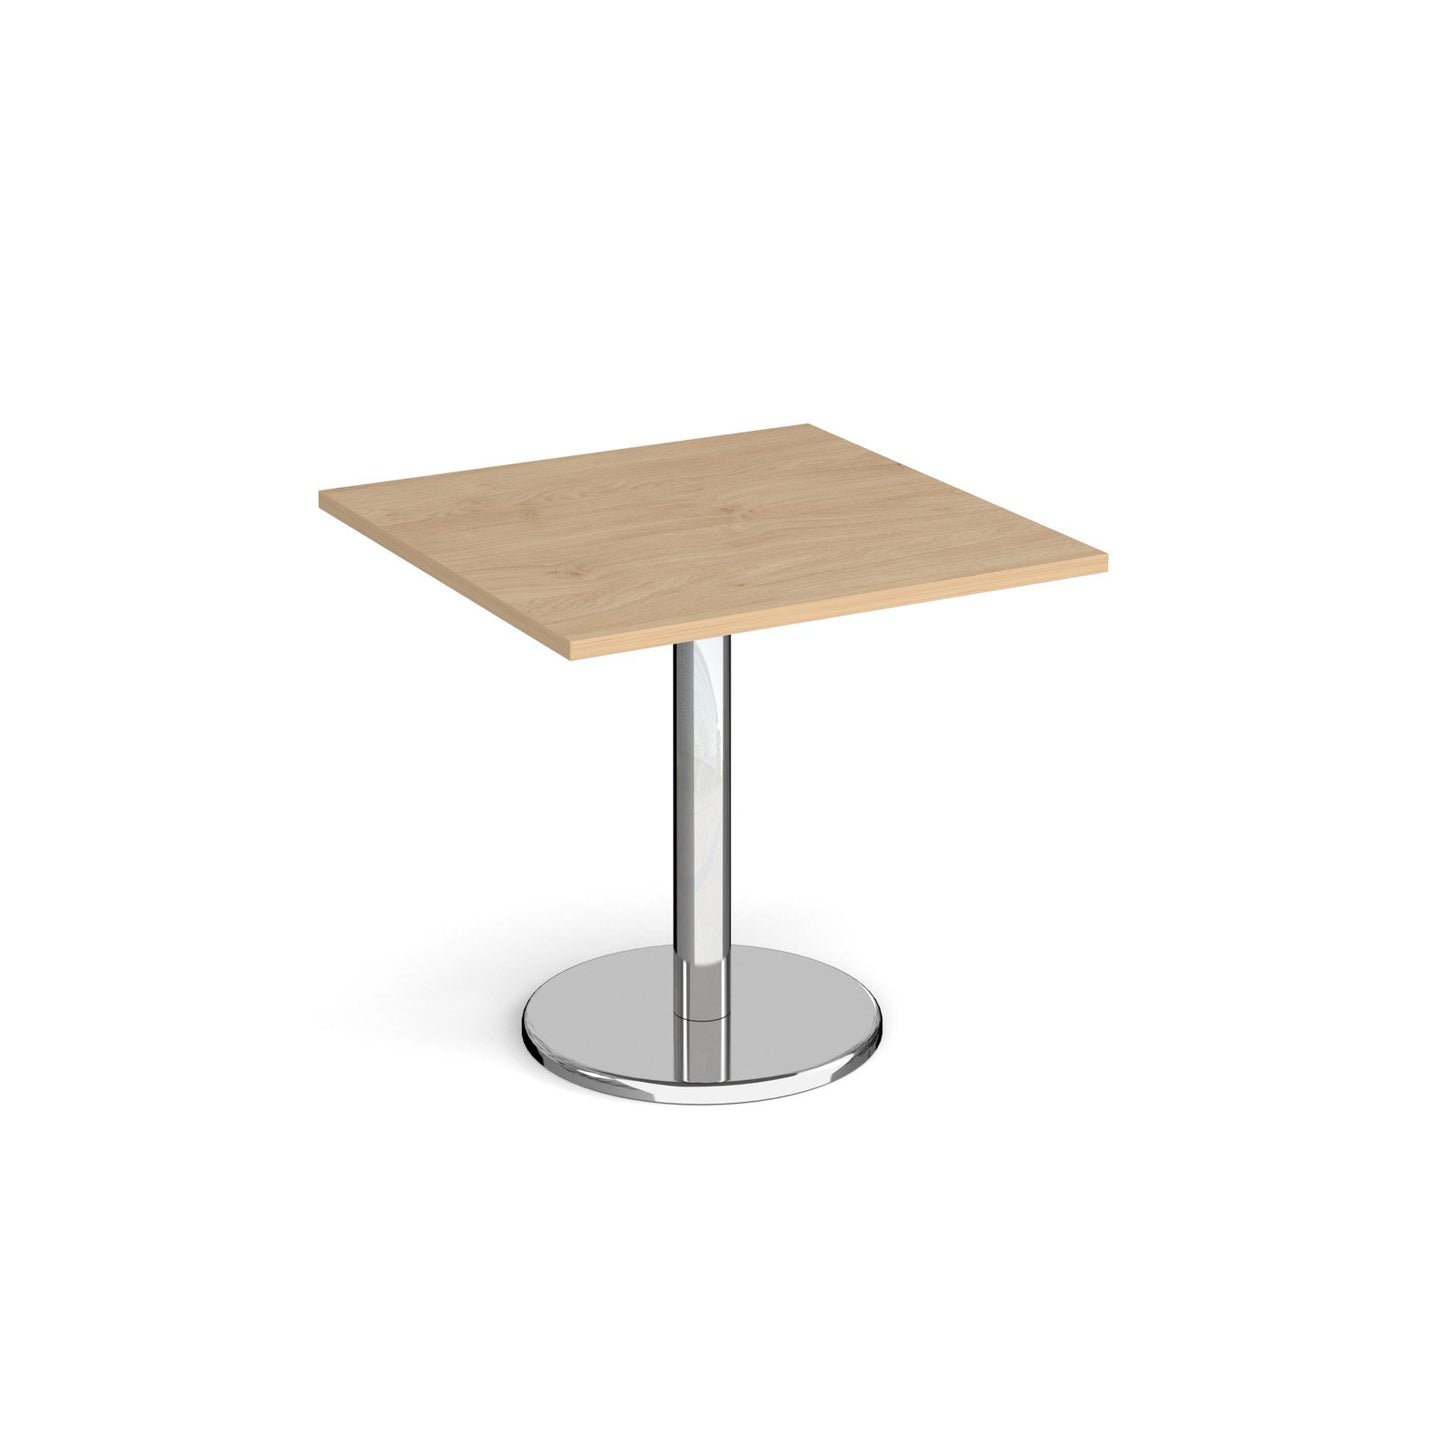 Pisa square dining table with round base